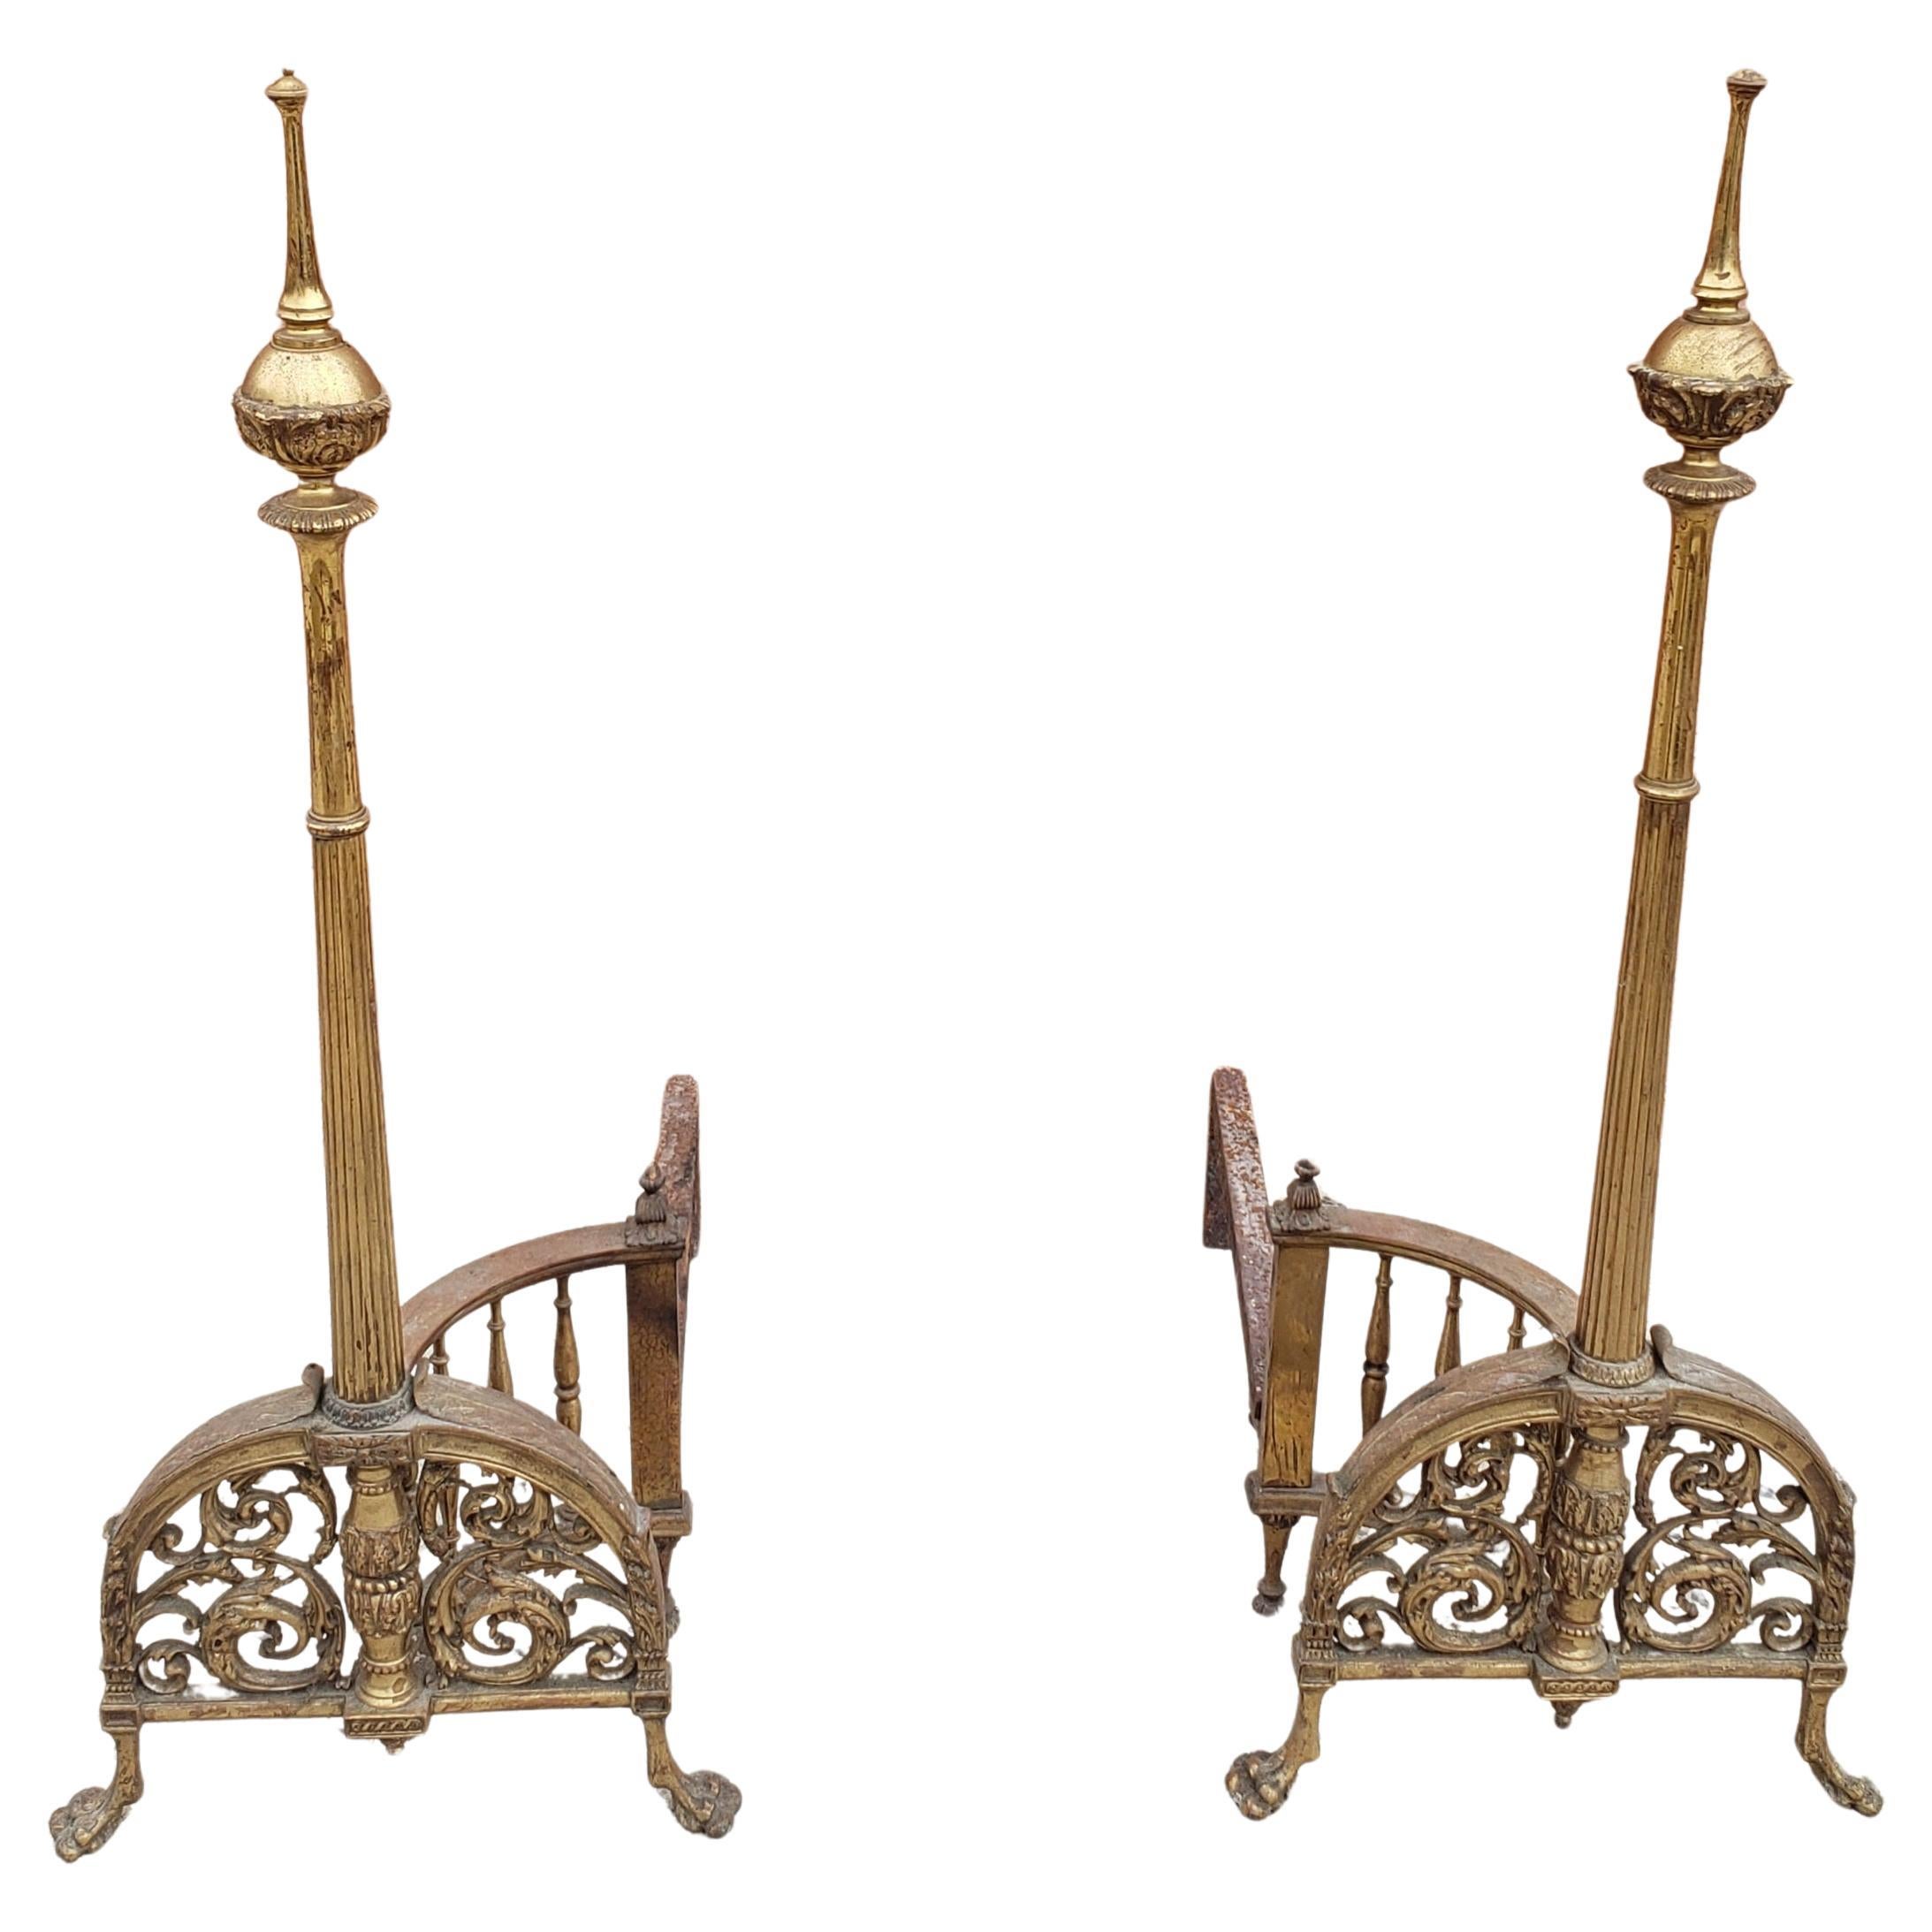 Early 20th Century Tall French Empire Brass and Iron Andirons, Pair